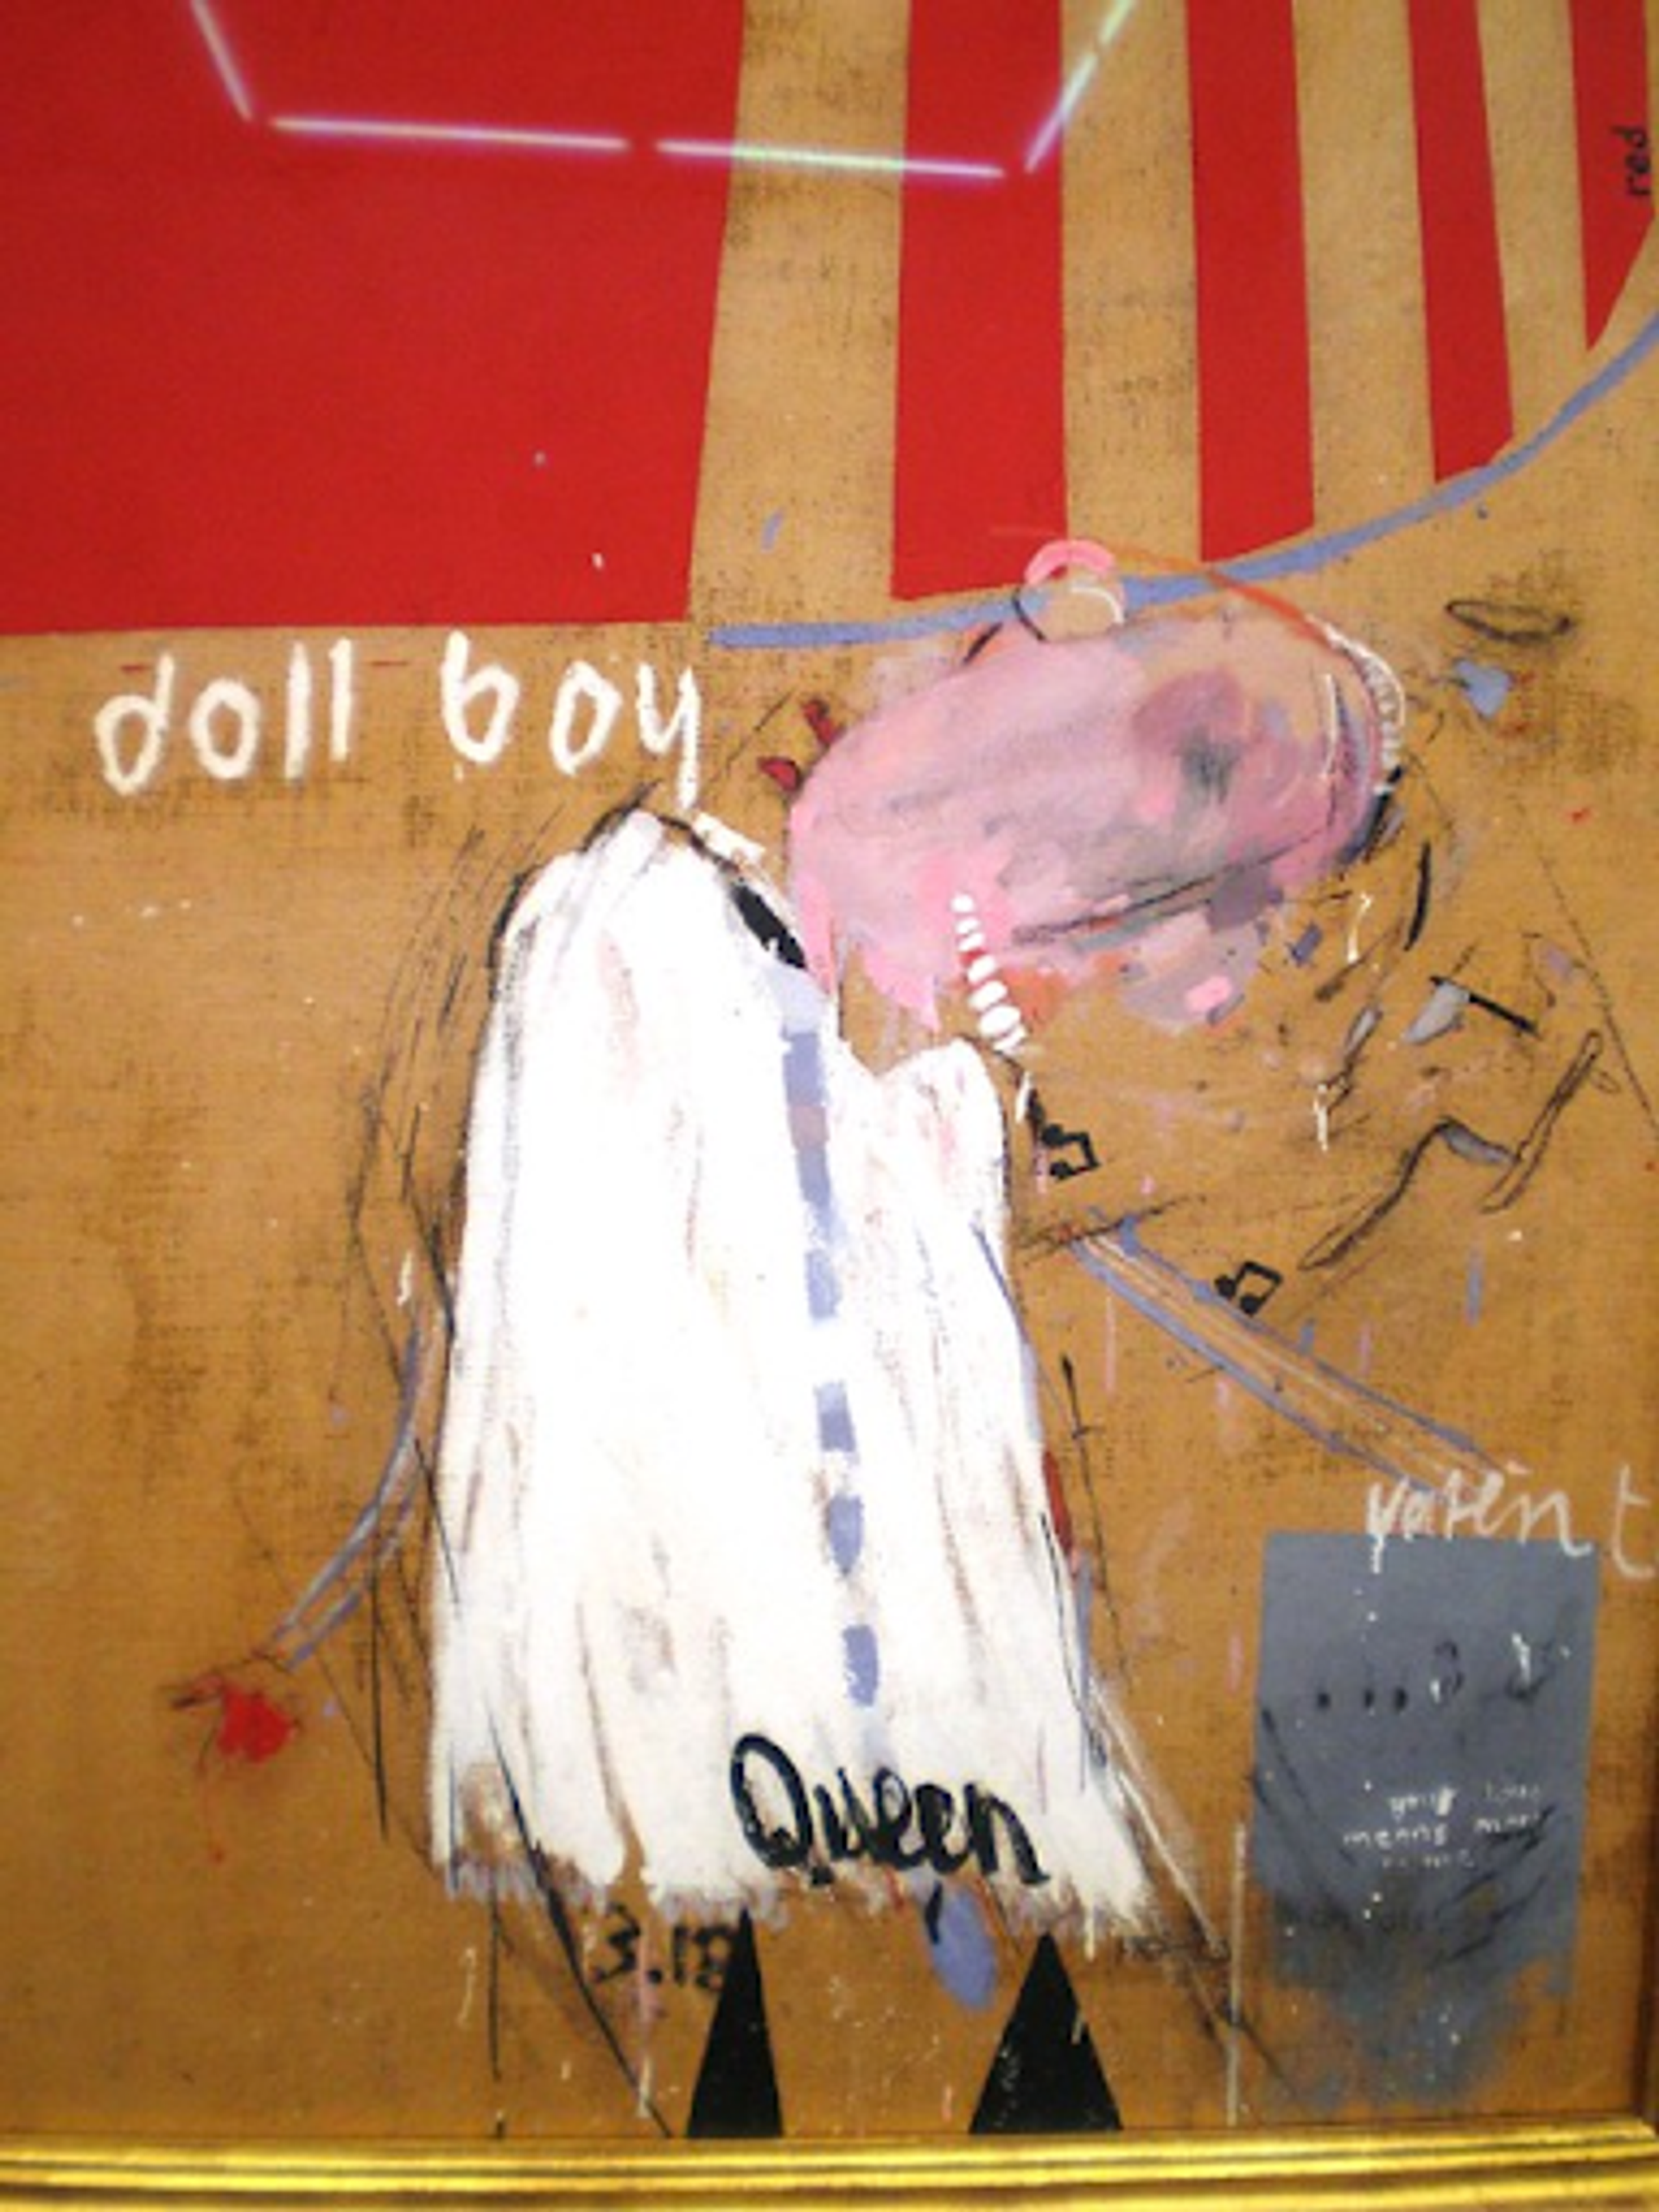 David Hockney's Doll Boy. A painting of a boy with his head hanging down with the text "doll boy" beside him and "Queen" below him